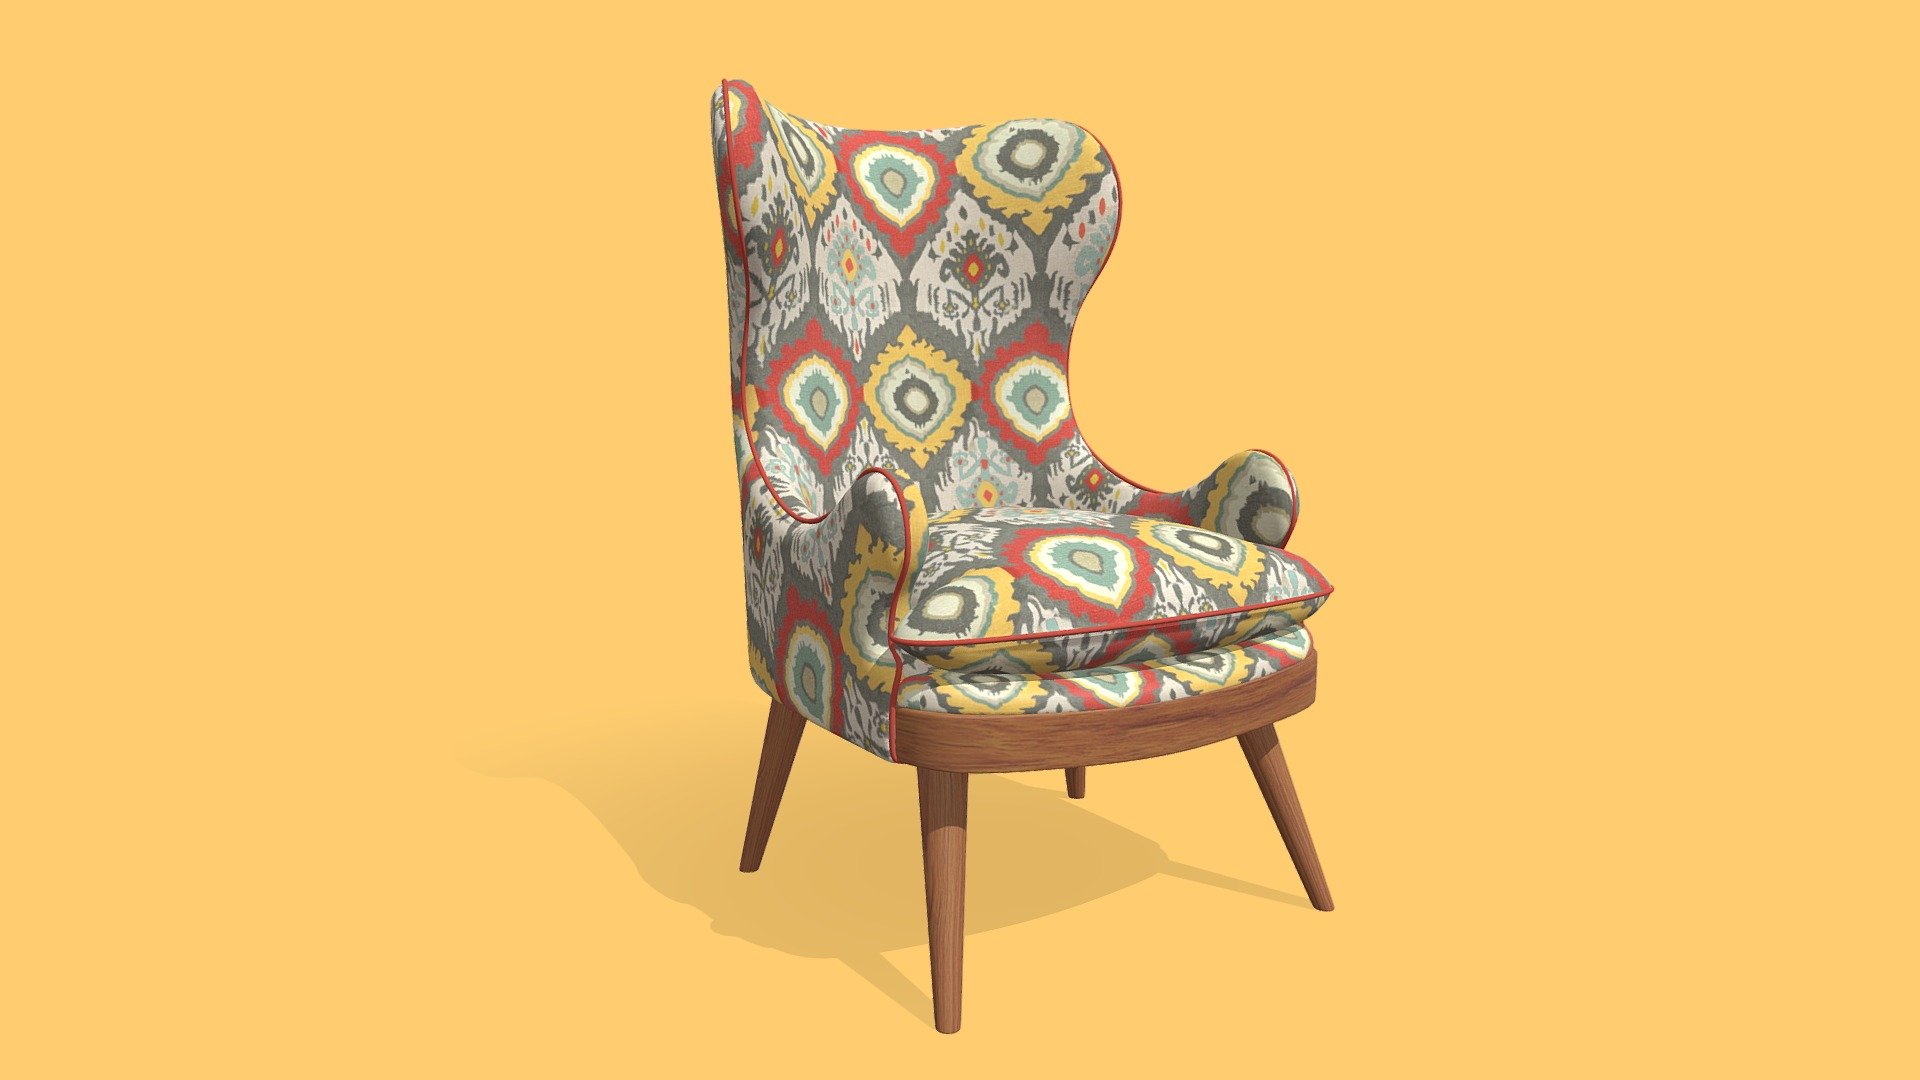 File format: FBX, OBJ,glb

Textures: 2K, 1K (Albedo, Normal, Metallic, Roughness, AO)

Intended use: AR/VR/Gaming

Real-world scale

Tools used: Blender3D
 - Lounge Chair - 3D model by monkxperience 3d model